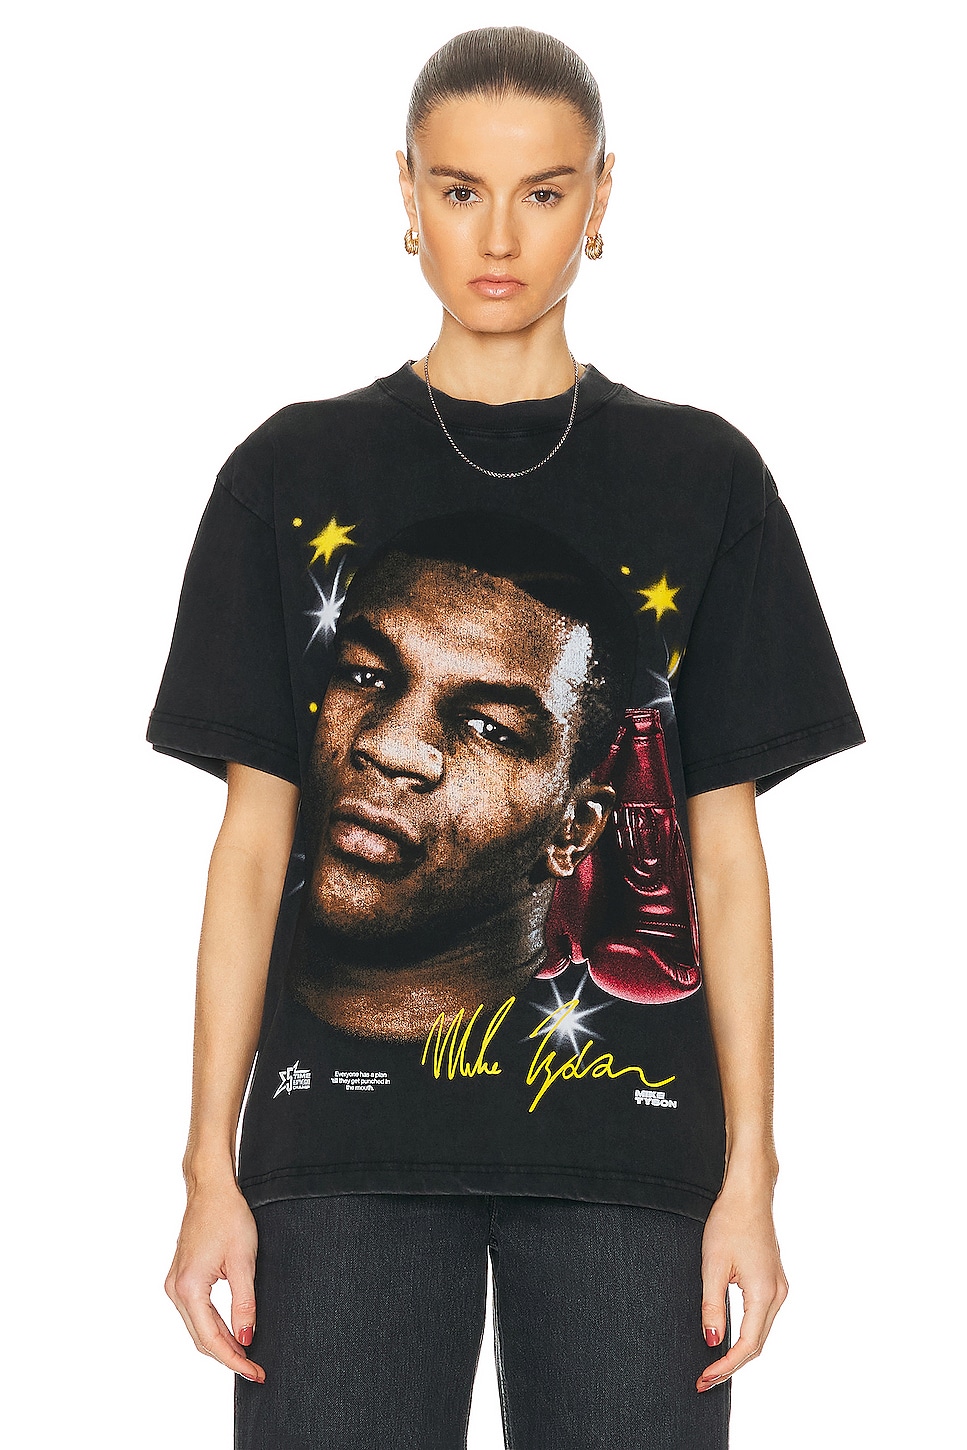 Mike Tyson Airbrush Gloves Tee in Black